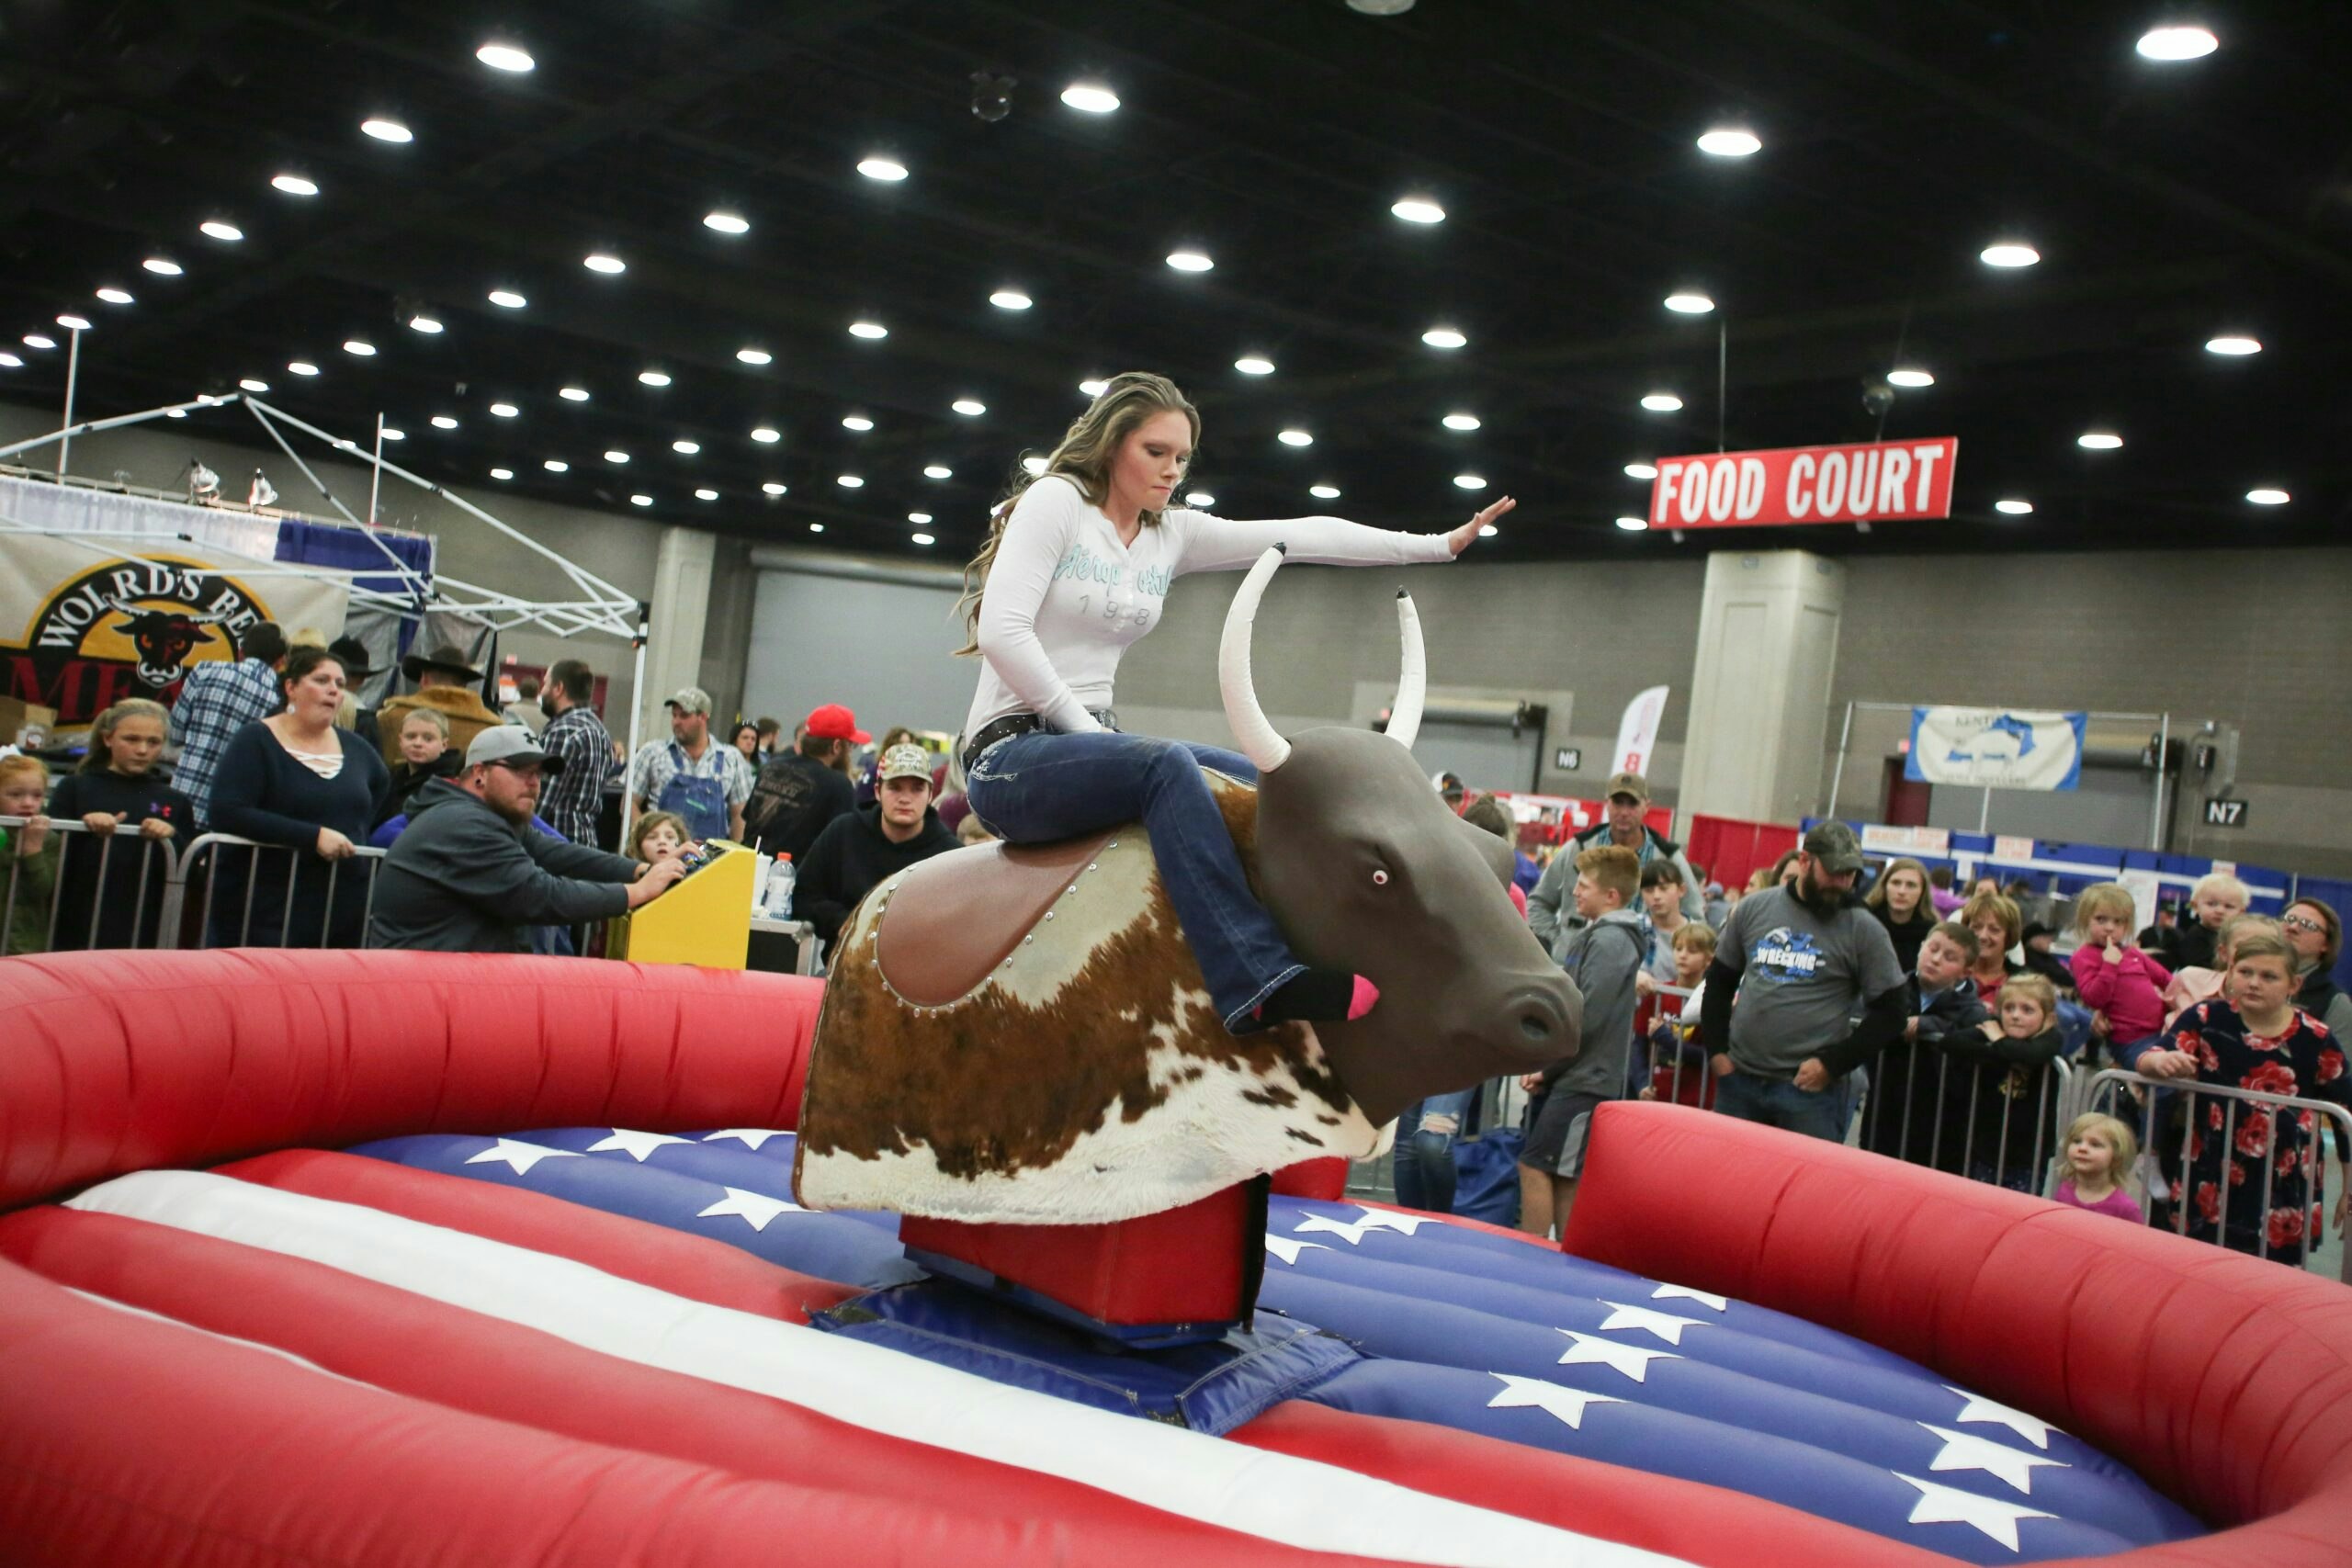 11/6/19 North American Championship Rodeo Rides into Freedom Hall